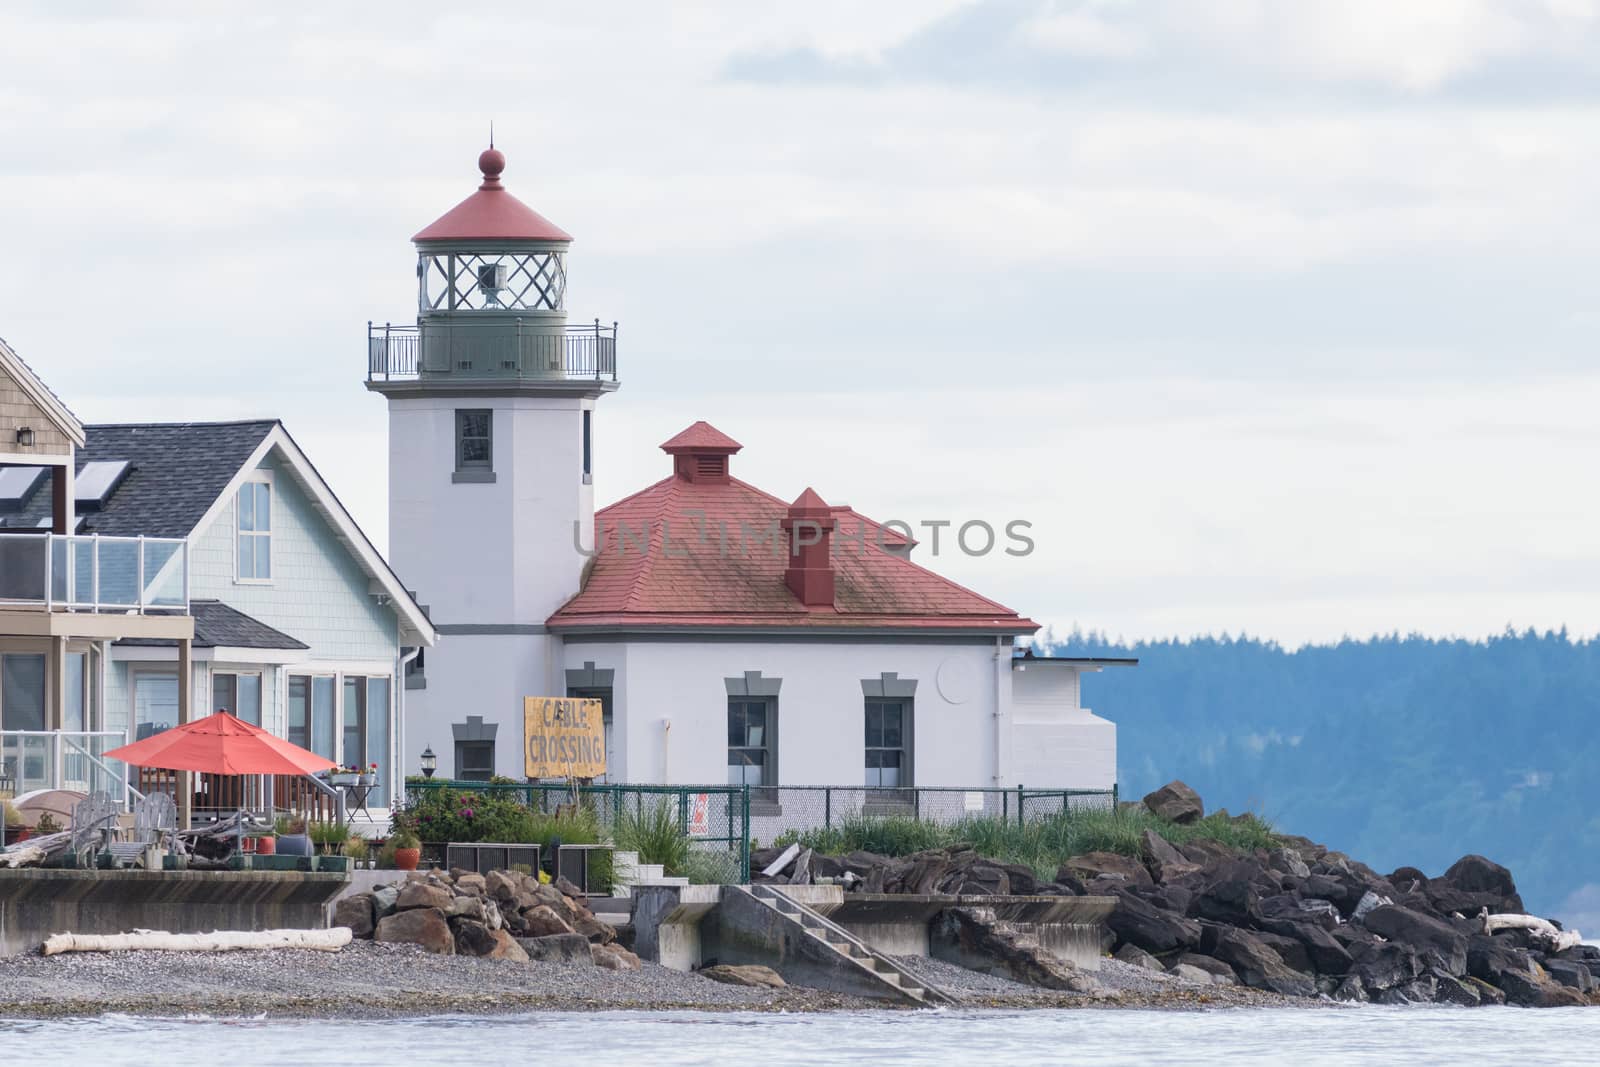 Seattle's Alki Point Lighthouse taken from the water on a flat lit day